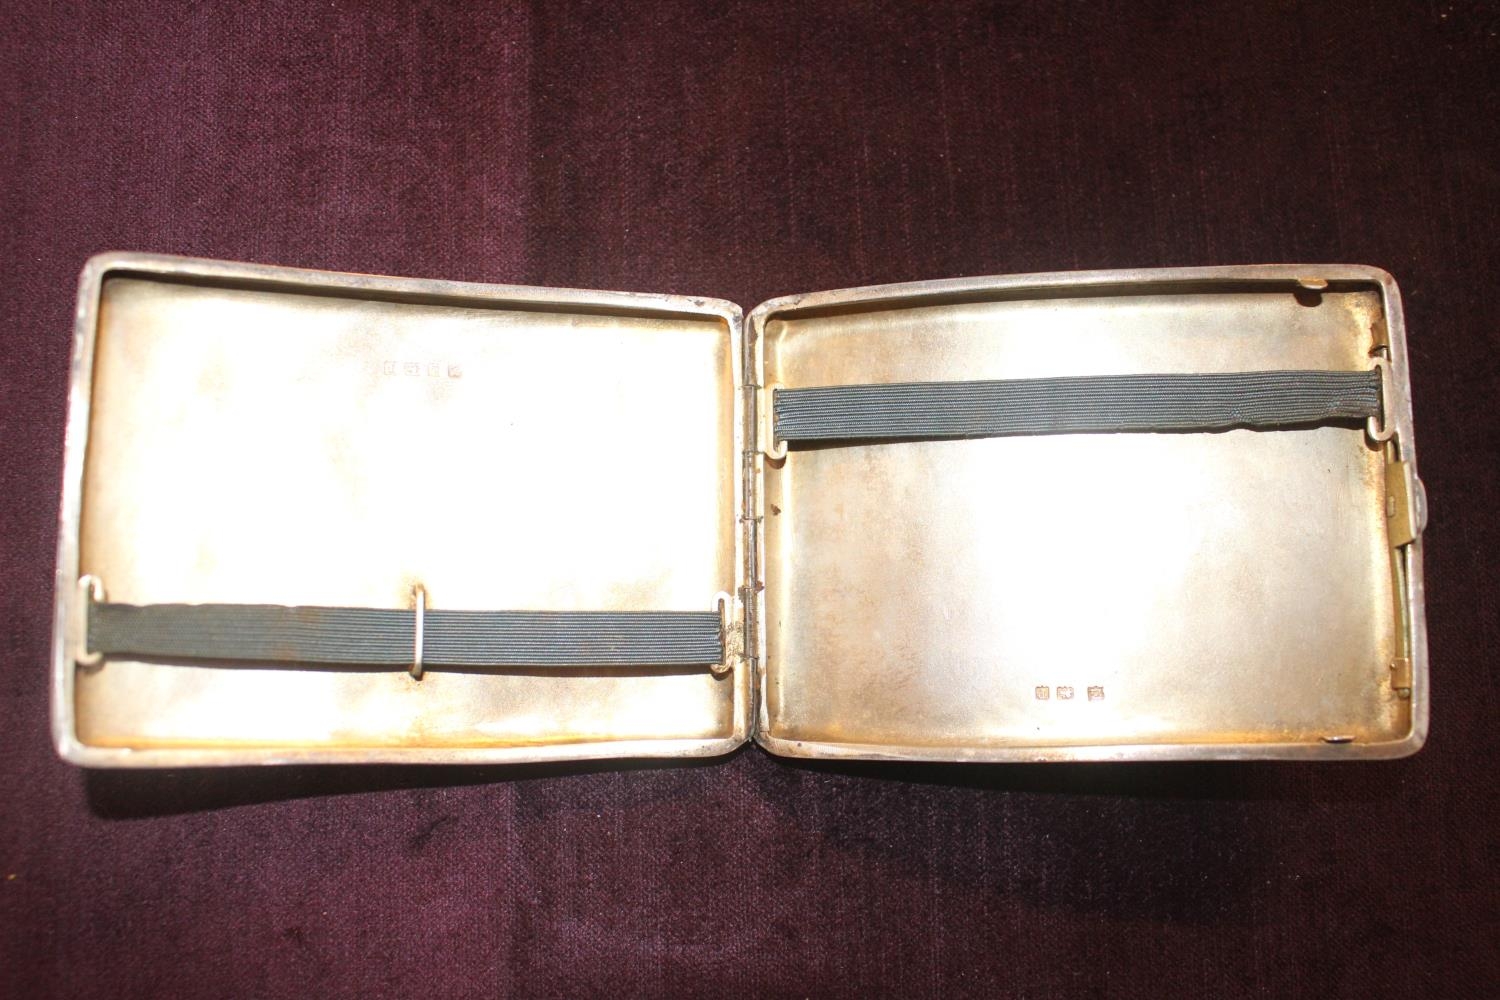 Silver curved cigarette case Birmingham 1939 by A & J Zimmerman 148g - Image 2 of 3